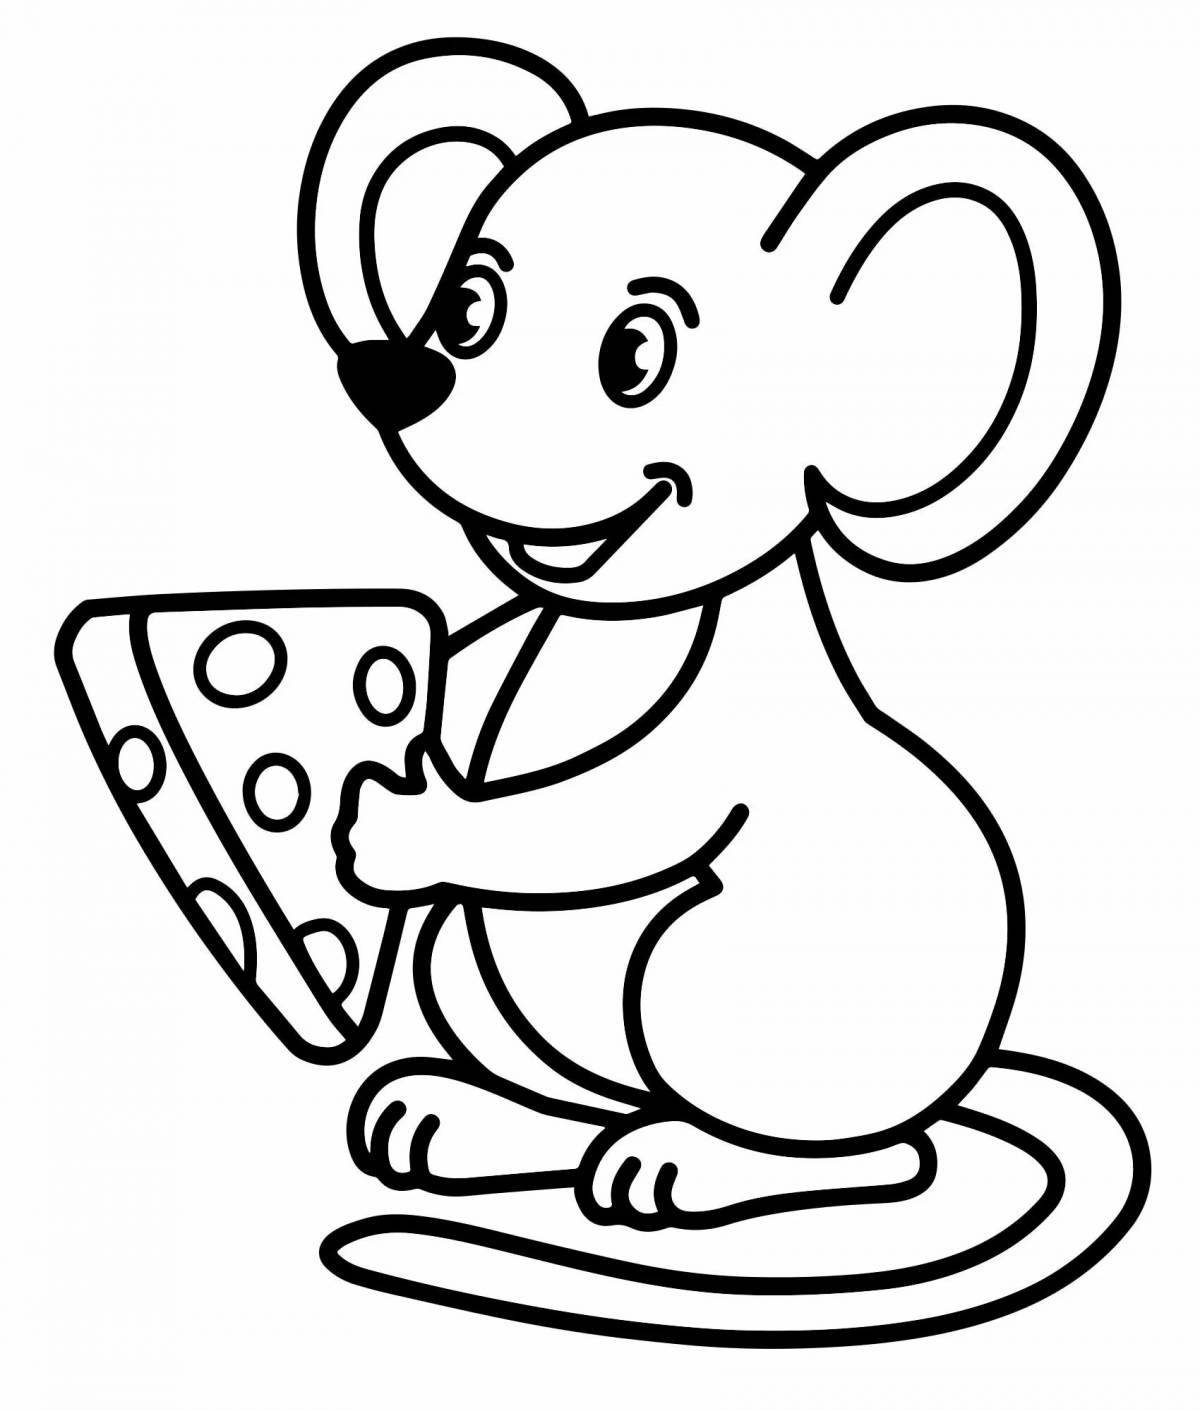 Coloring page charming little mouse